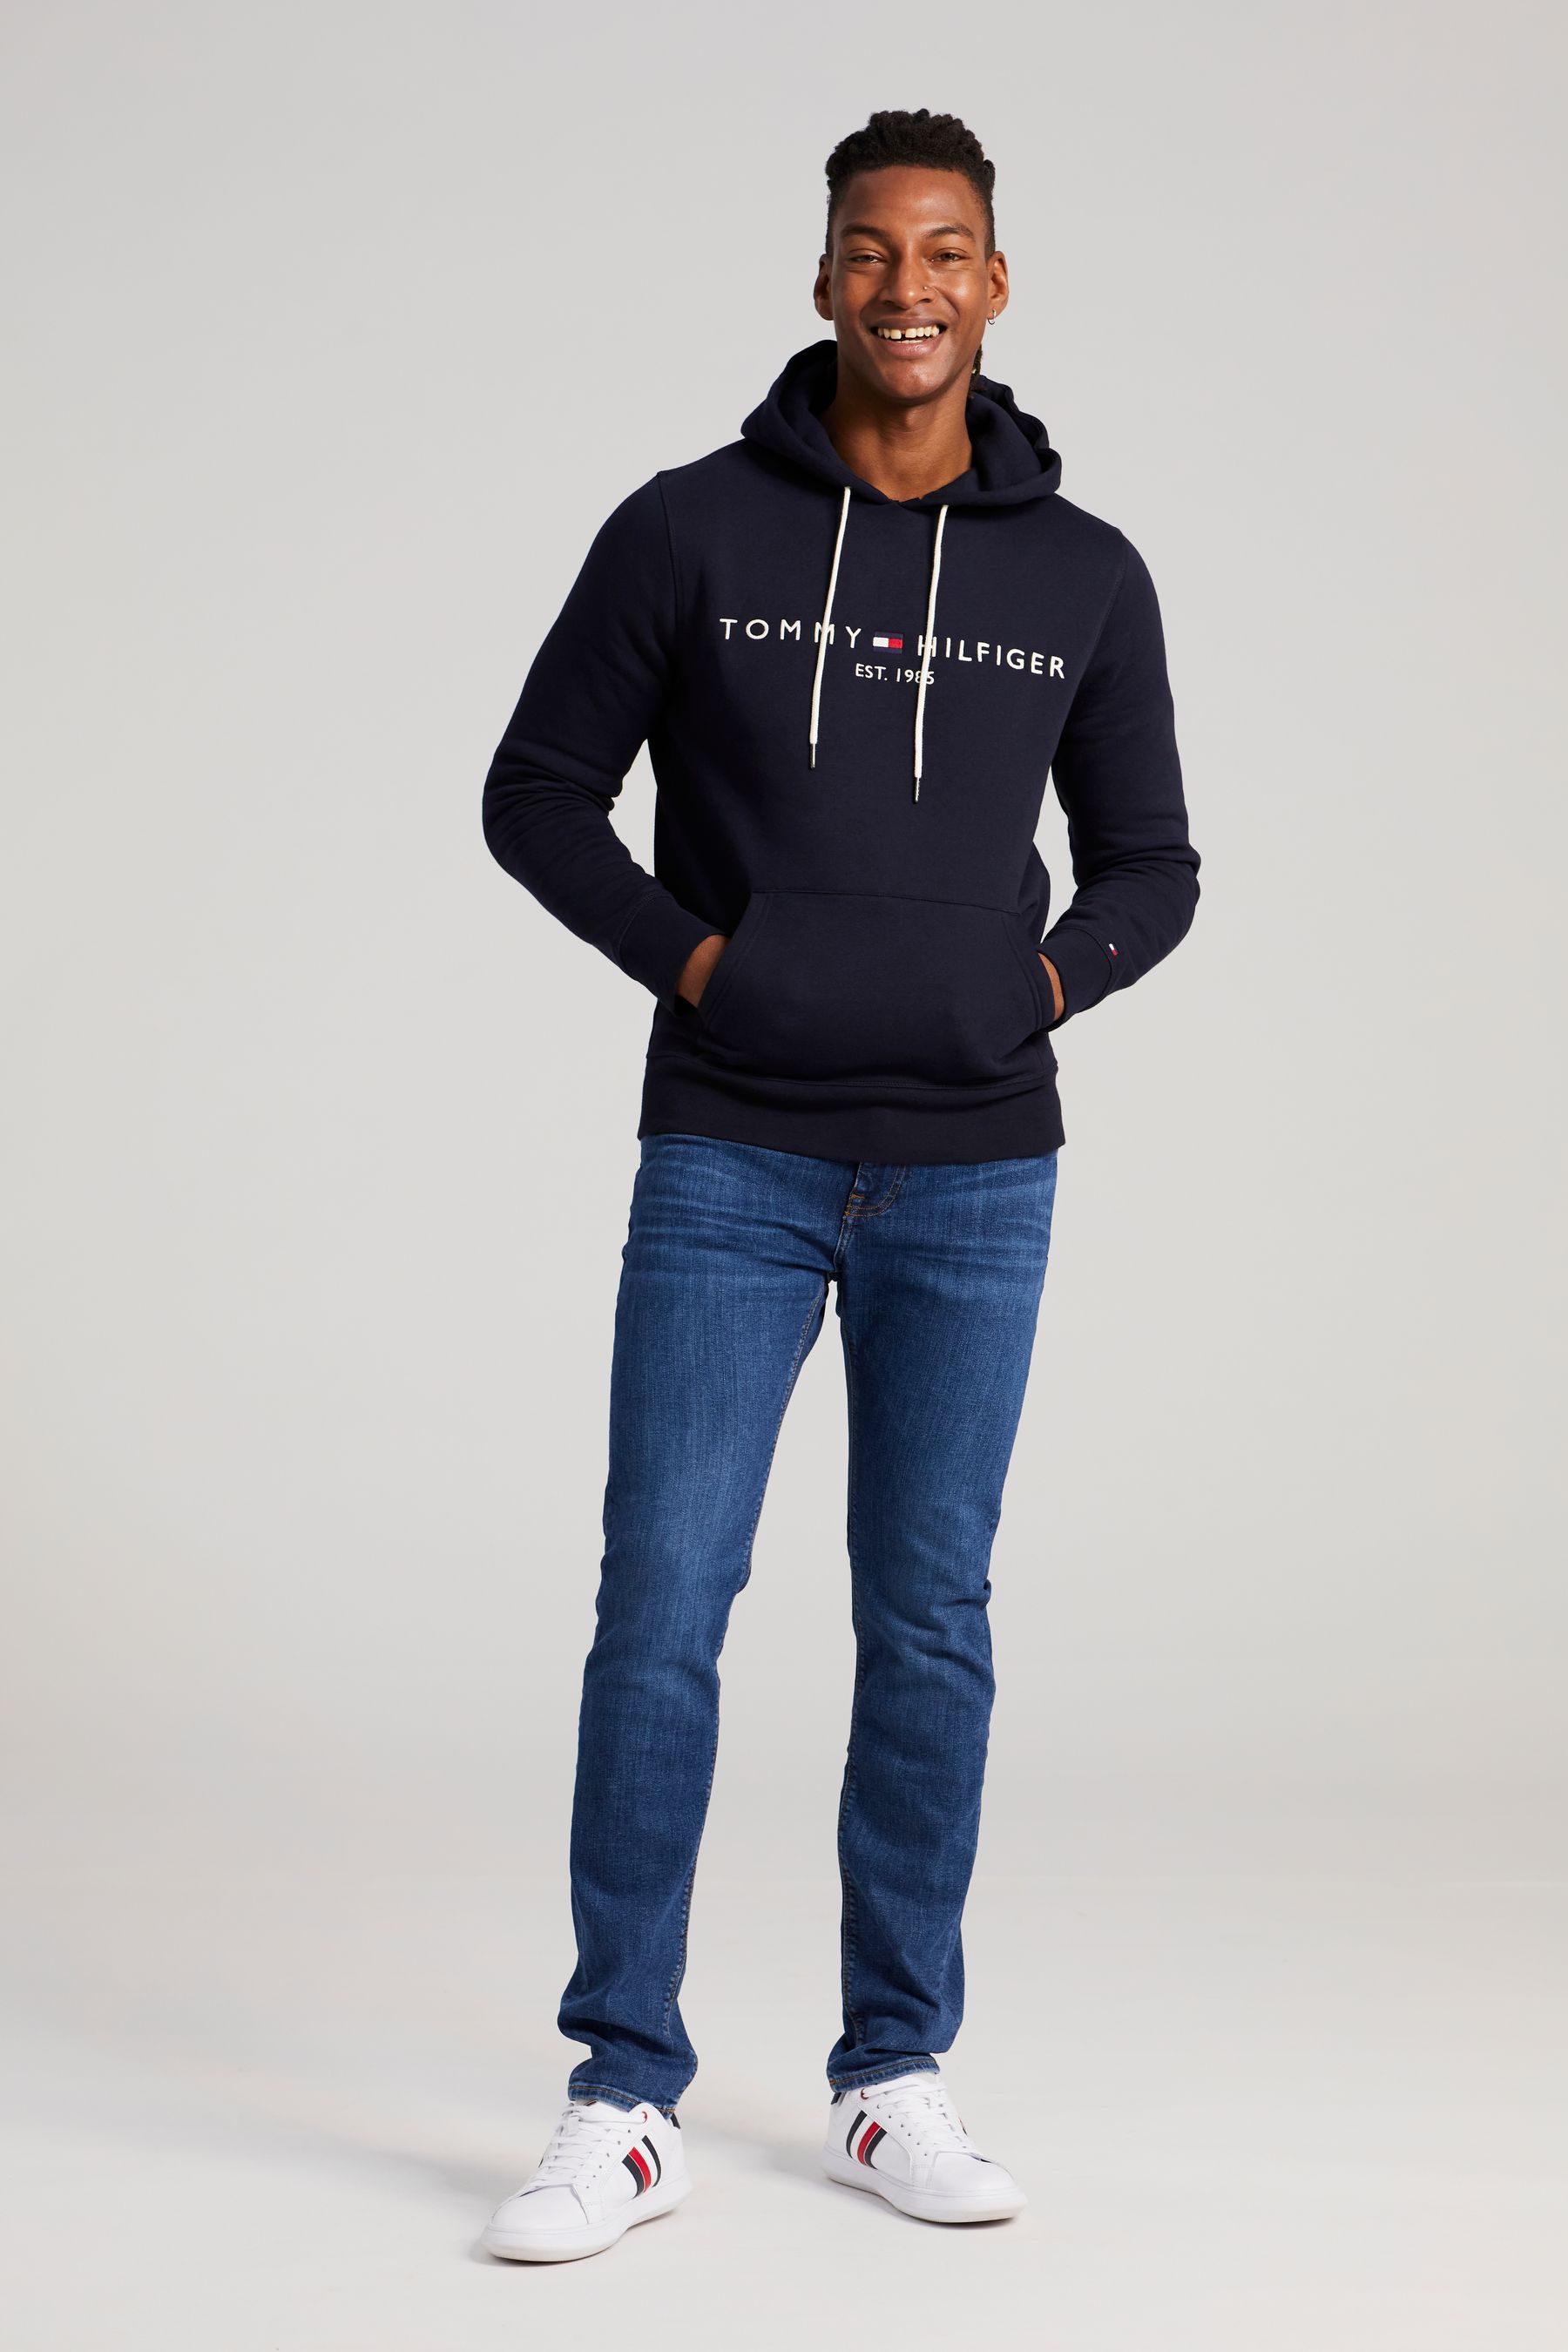 Buy Tommy Hilfiger Core Logo Hoodie from the Next UK online shop